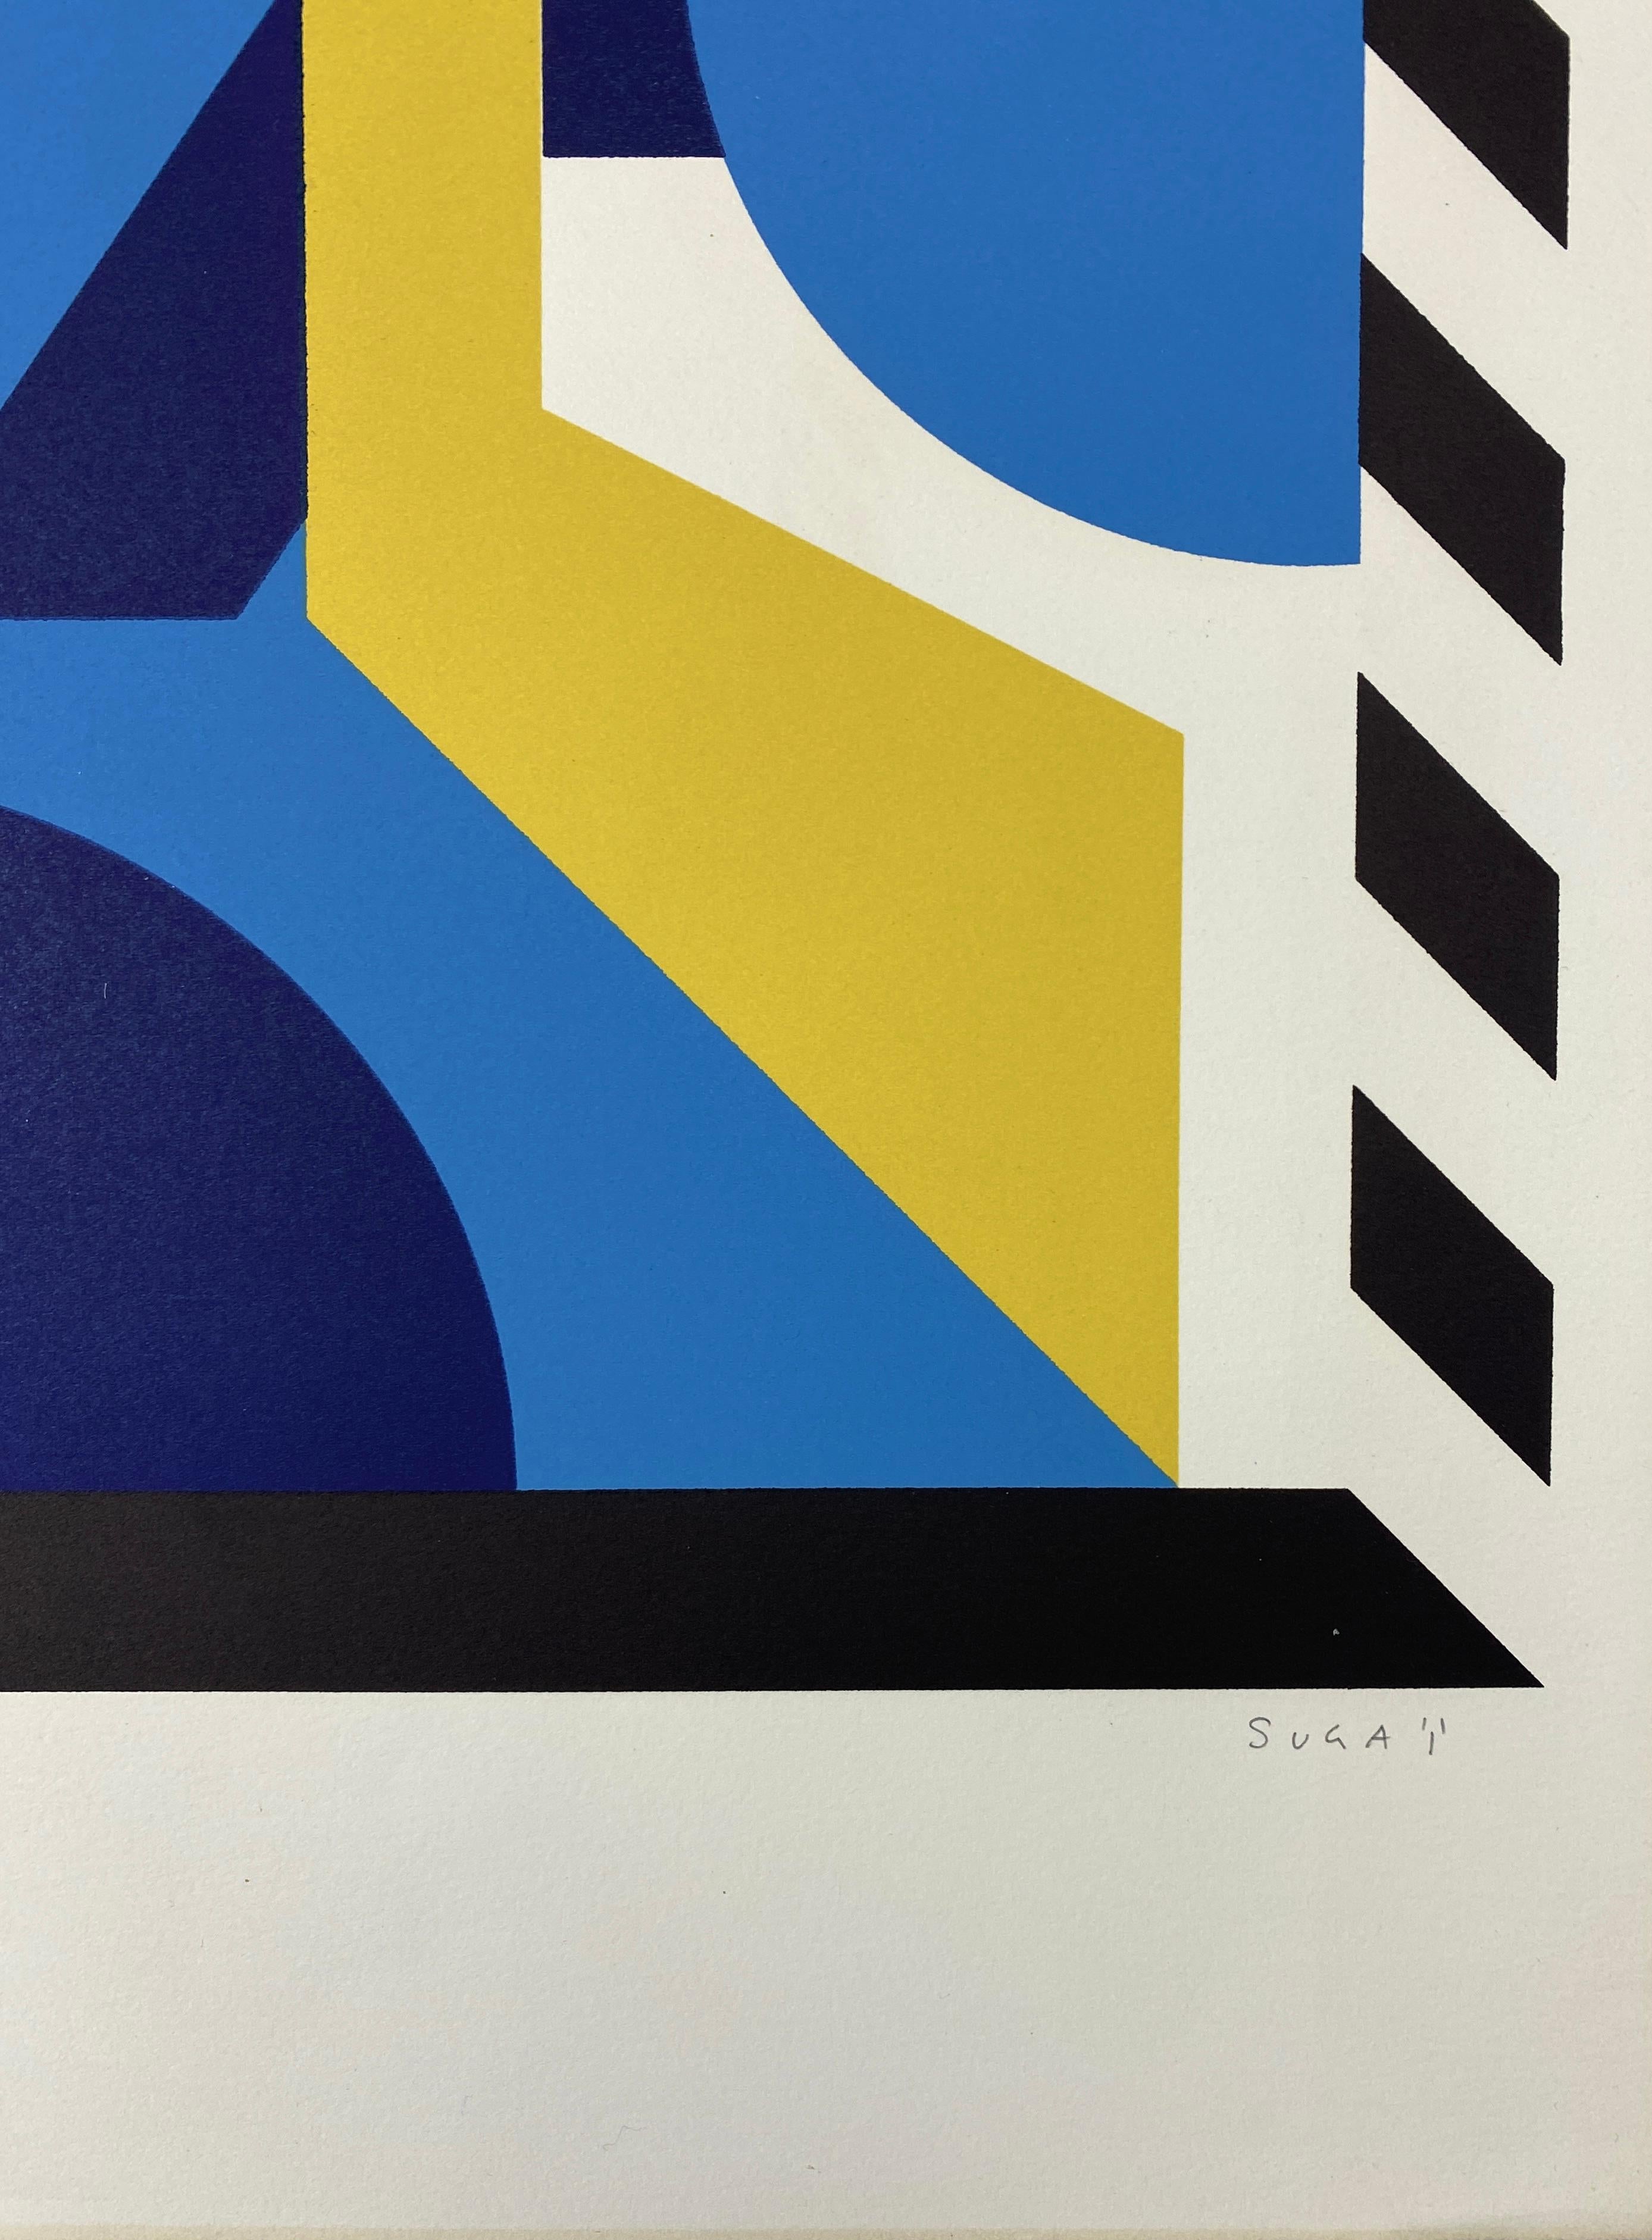 Post-Modern Kumi Sugaī Signed Lithograph Signal A 1974 For Sale